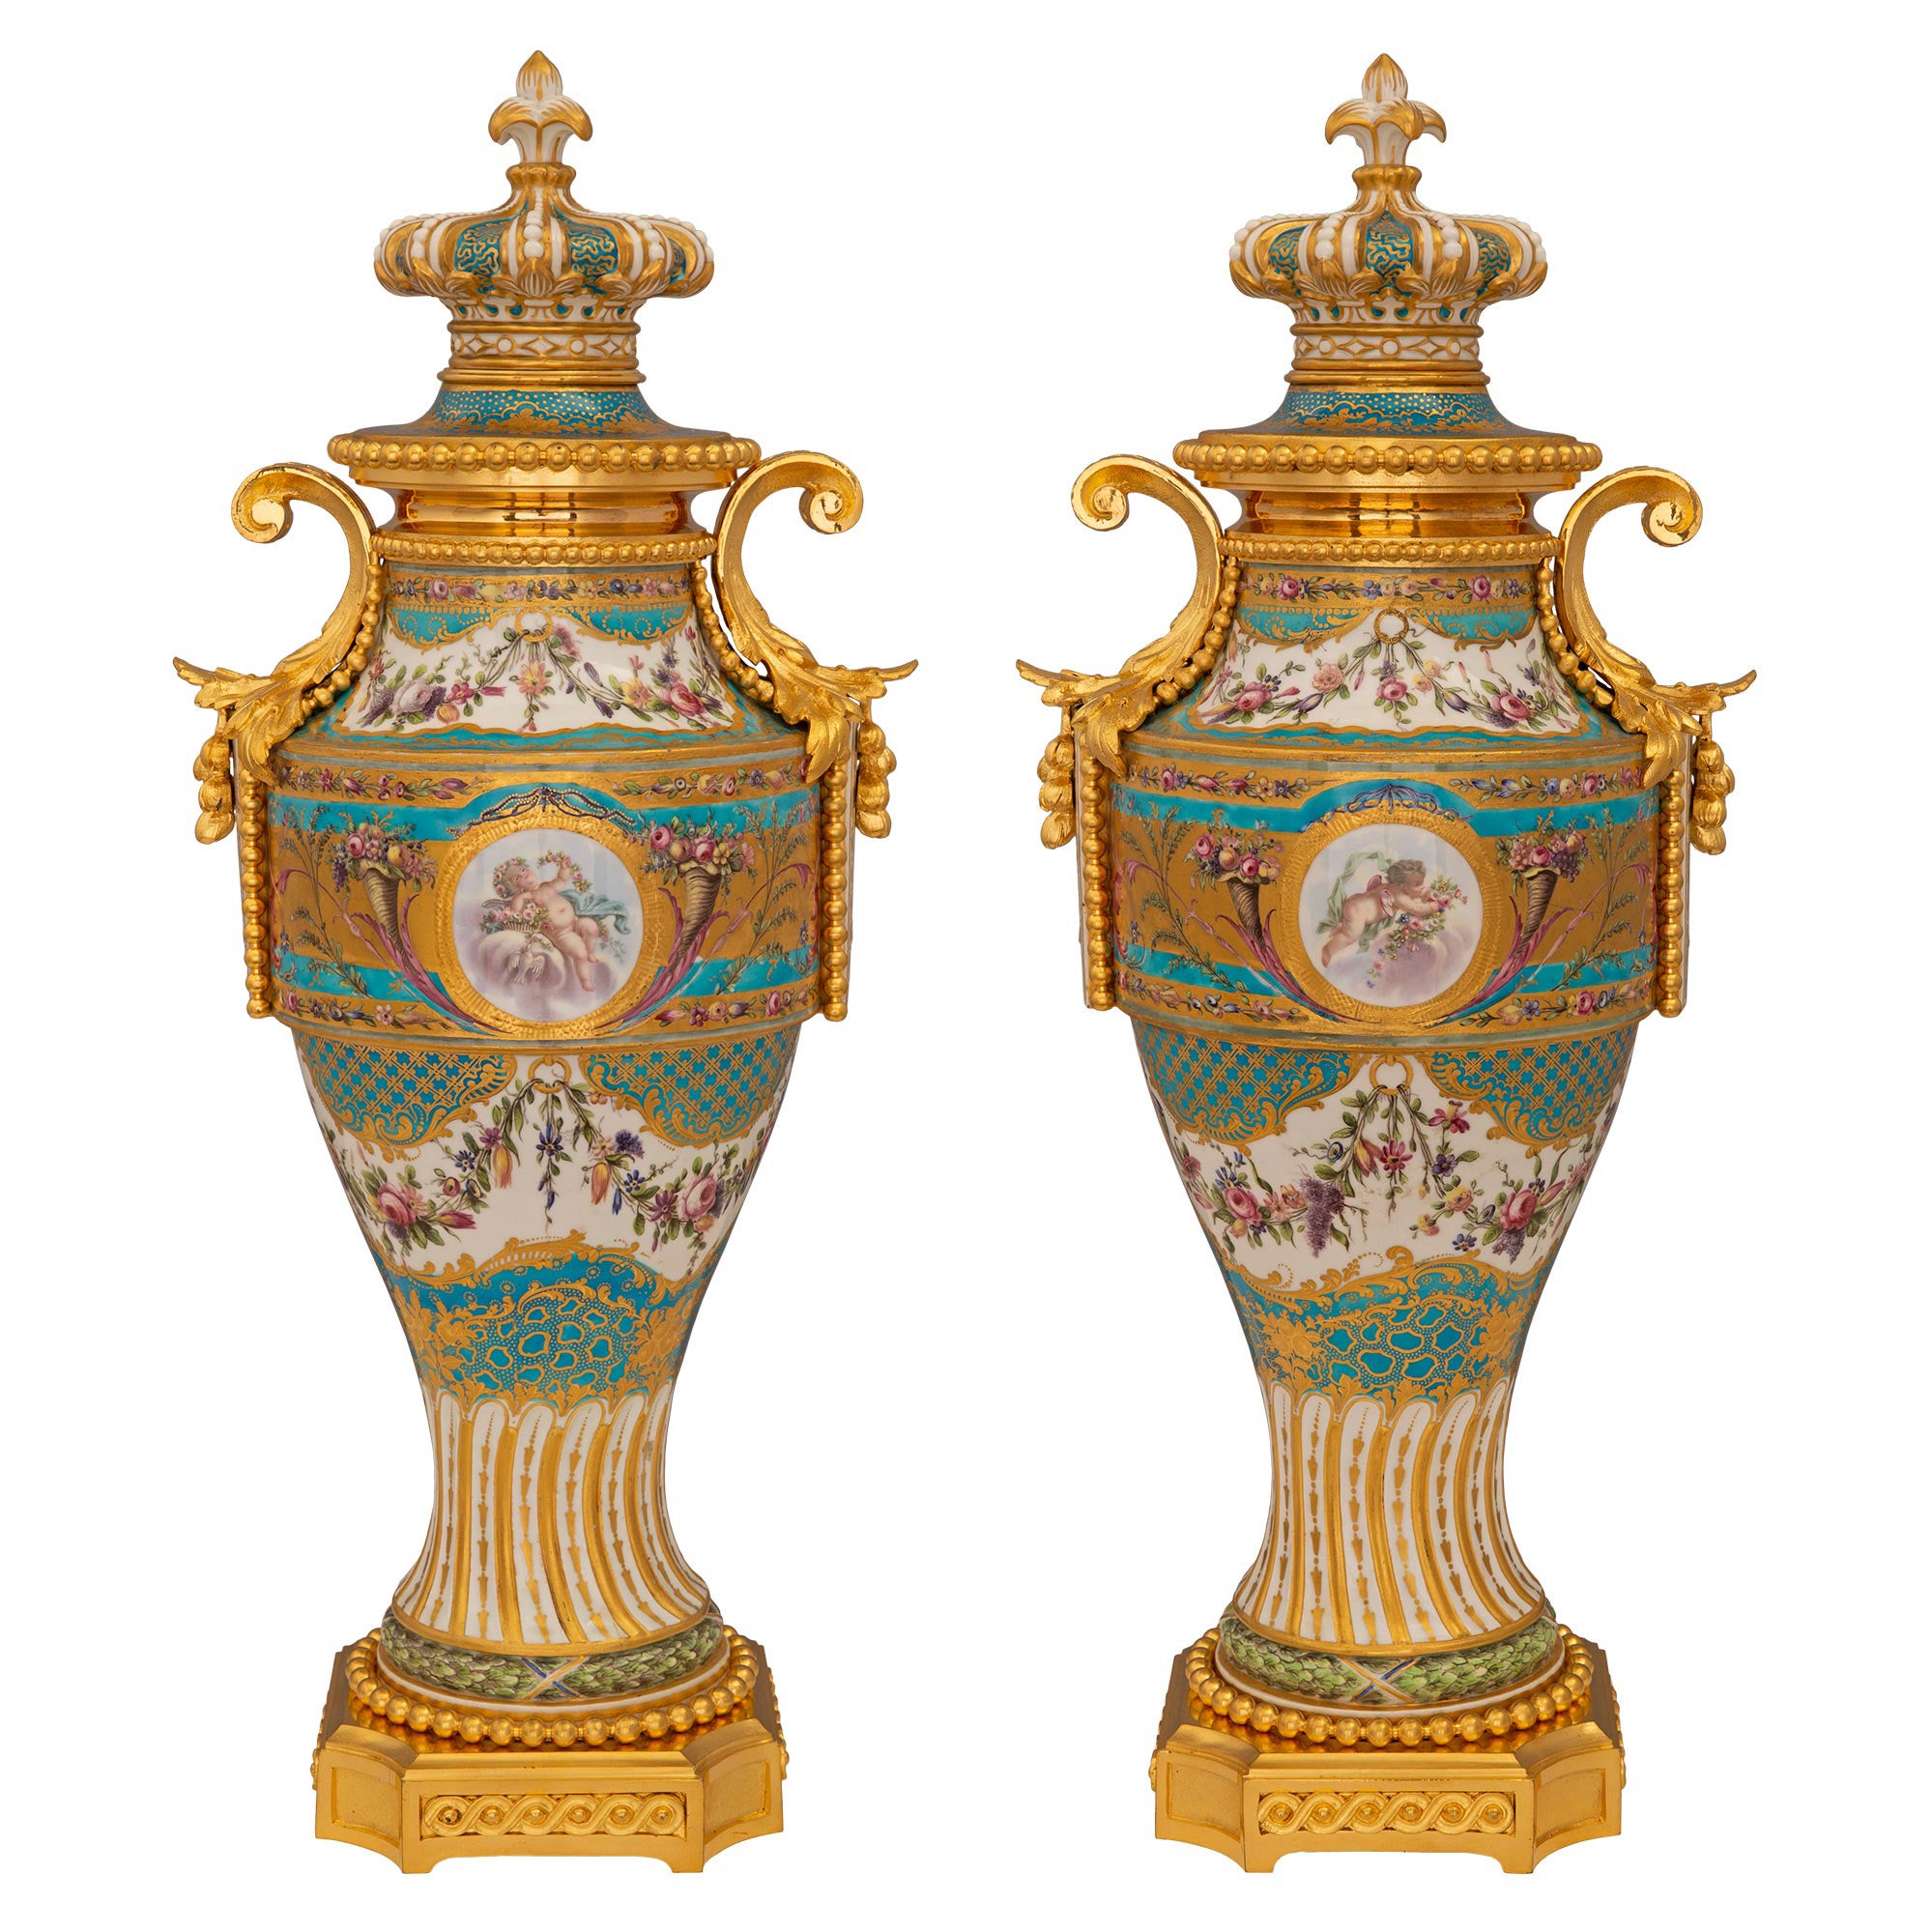 Pair of French 19th Century Louis XVI St. Sèvres Porcelain & Ormolu Lidded Urns For Sale